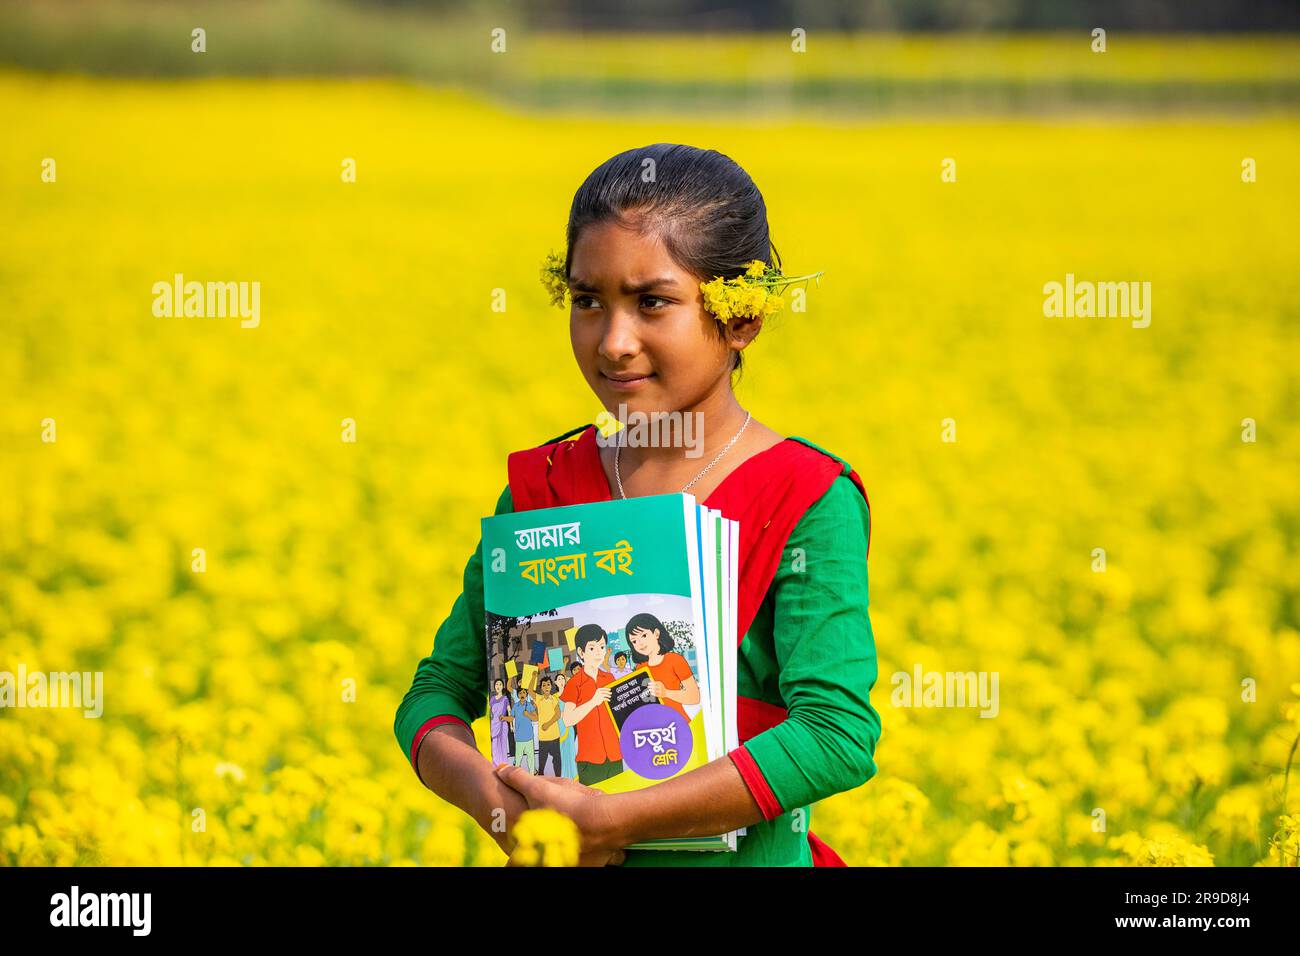 School girl in a Bangladeshi village, holding a board, with friend in the background Stock Photo